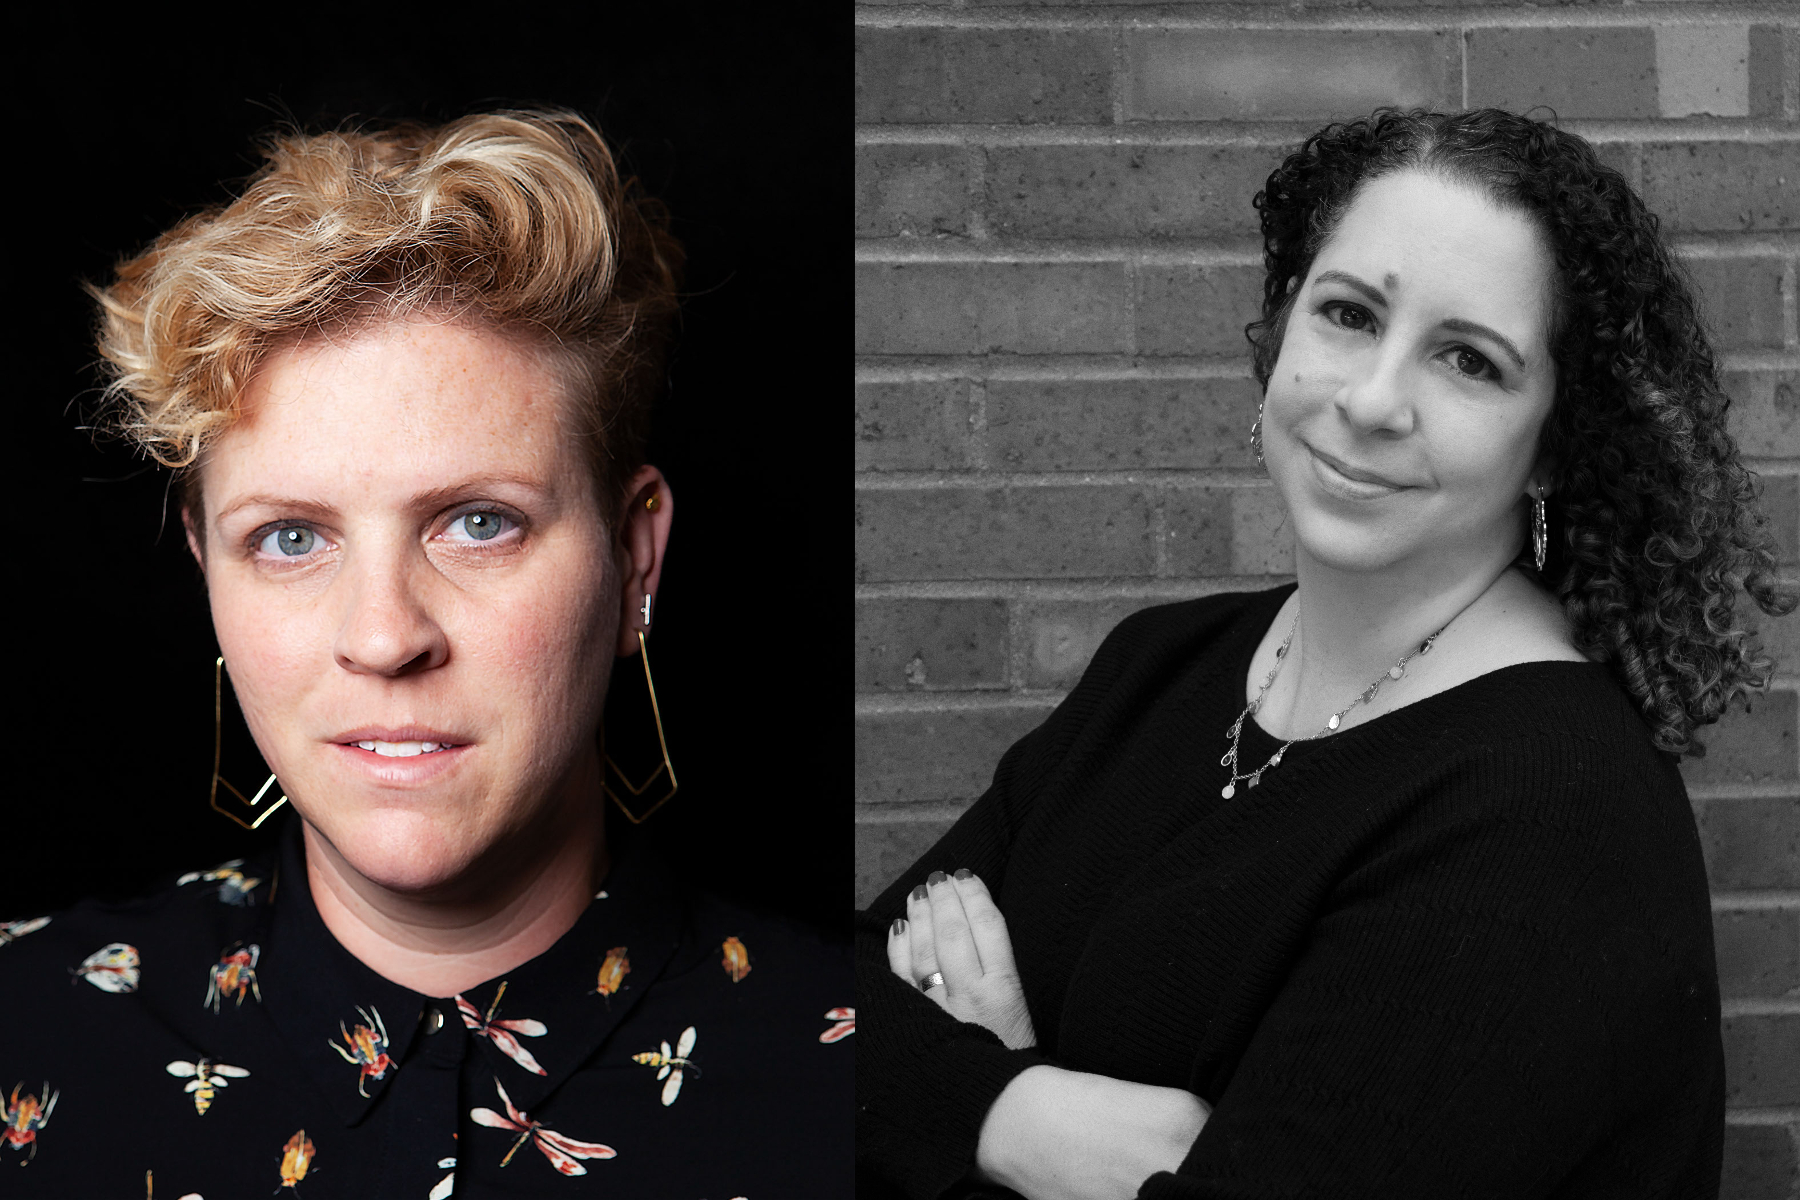 Faculty artists Jennifer Ray and Amanda Pfister will discuss their inspiration and processes.